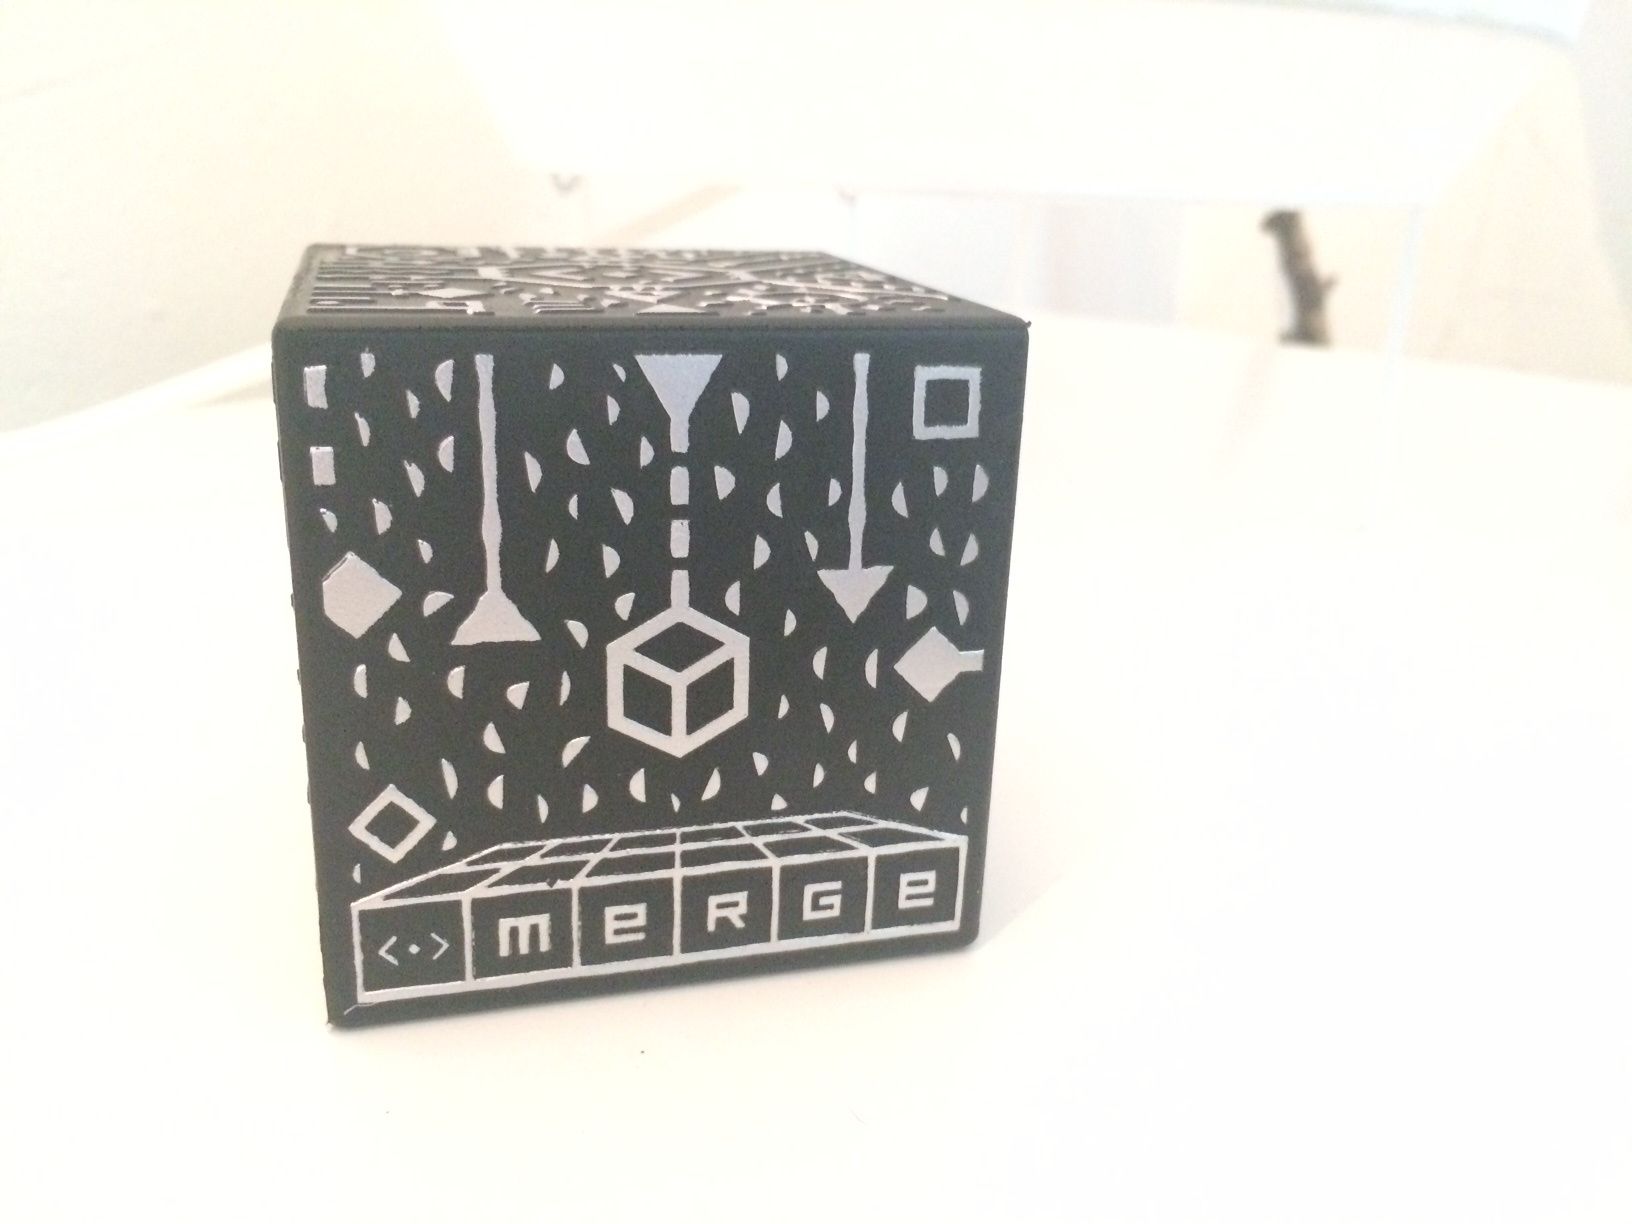 Merge Cube review